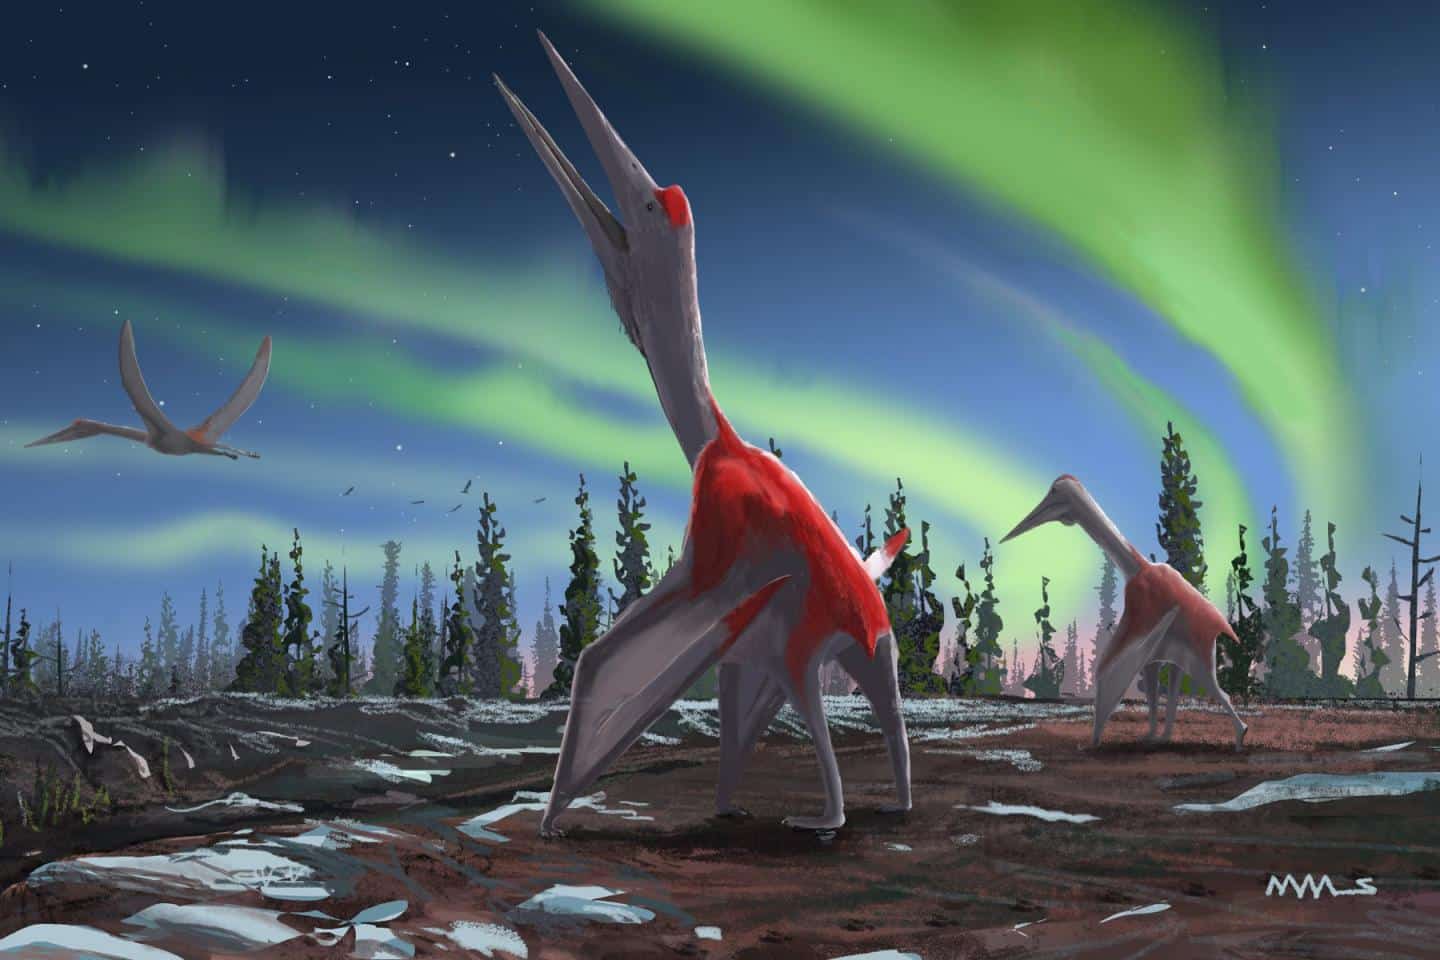 Fossils ID’d As New Species Of Giant Flying Reptile That Once Flew Above North America